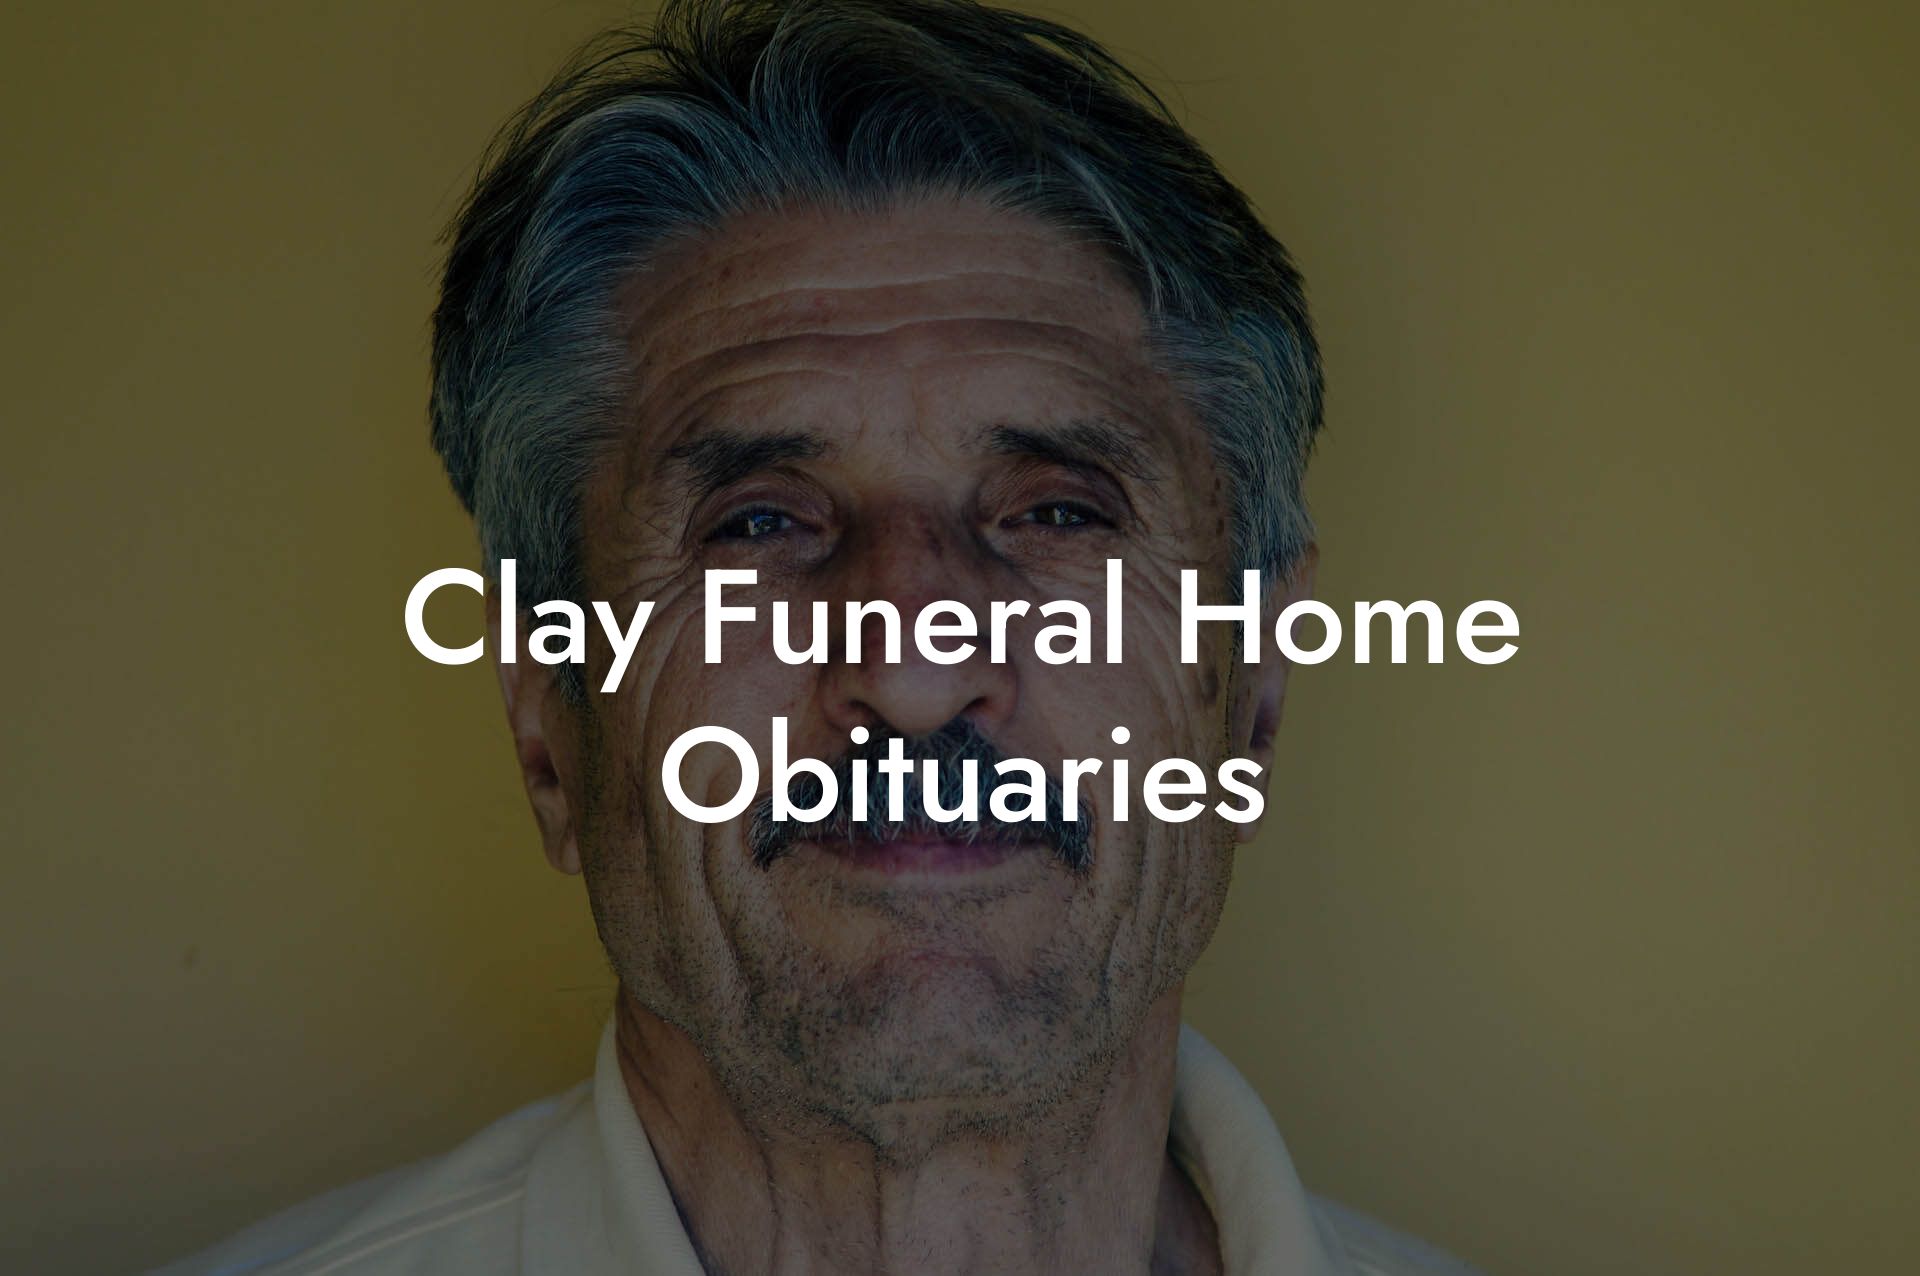 Clay Funeral Home Obituaries